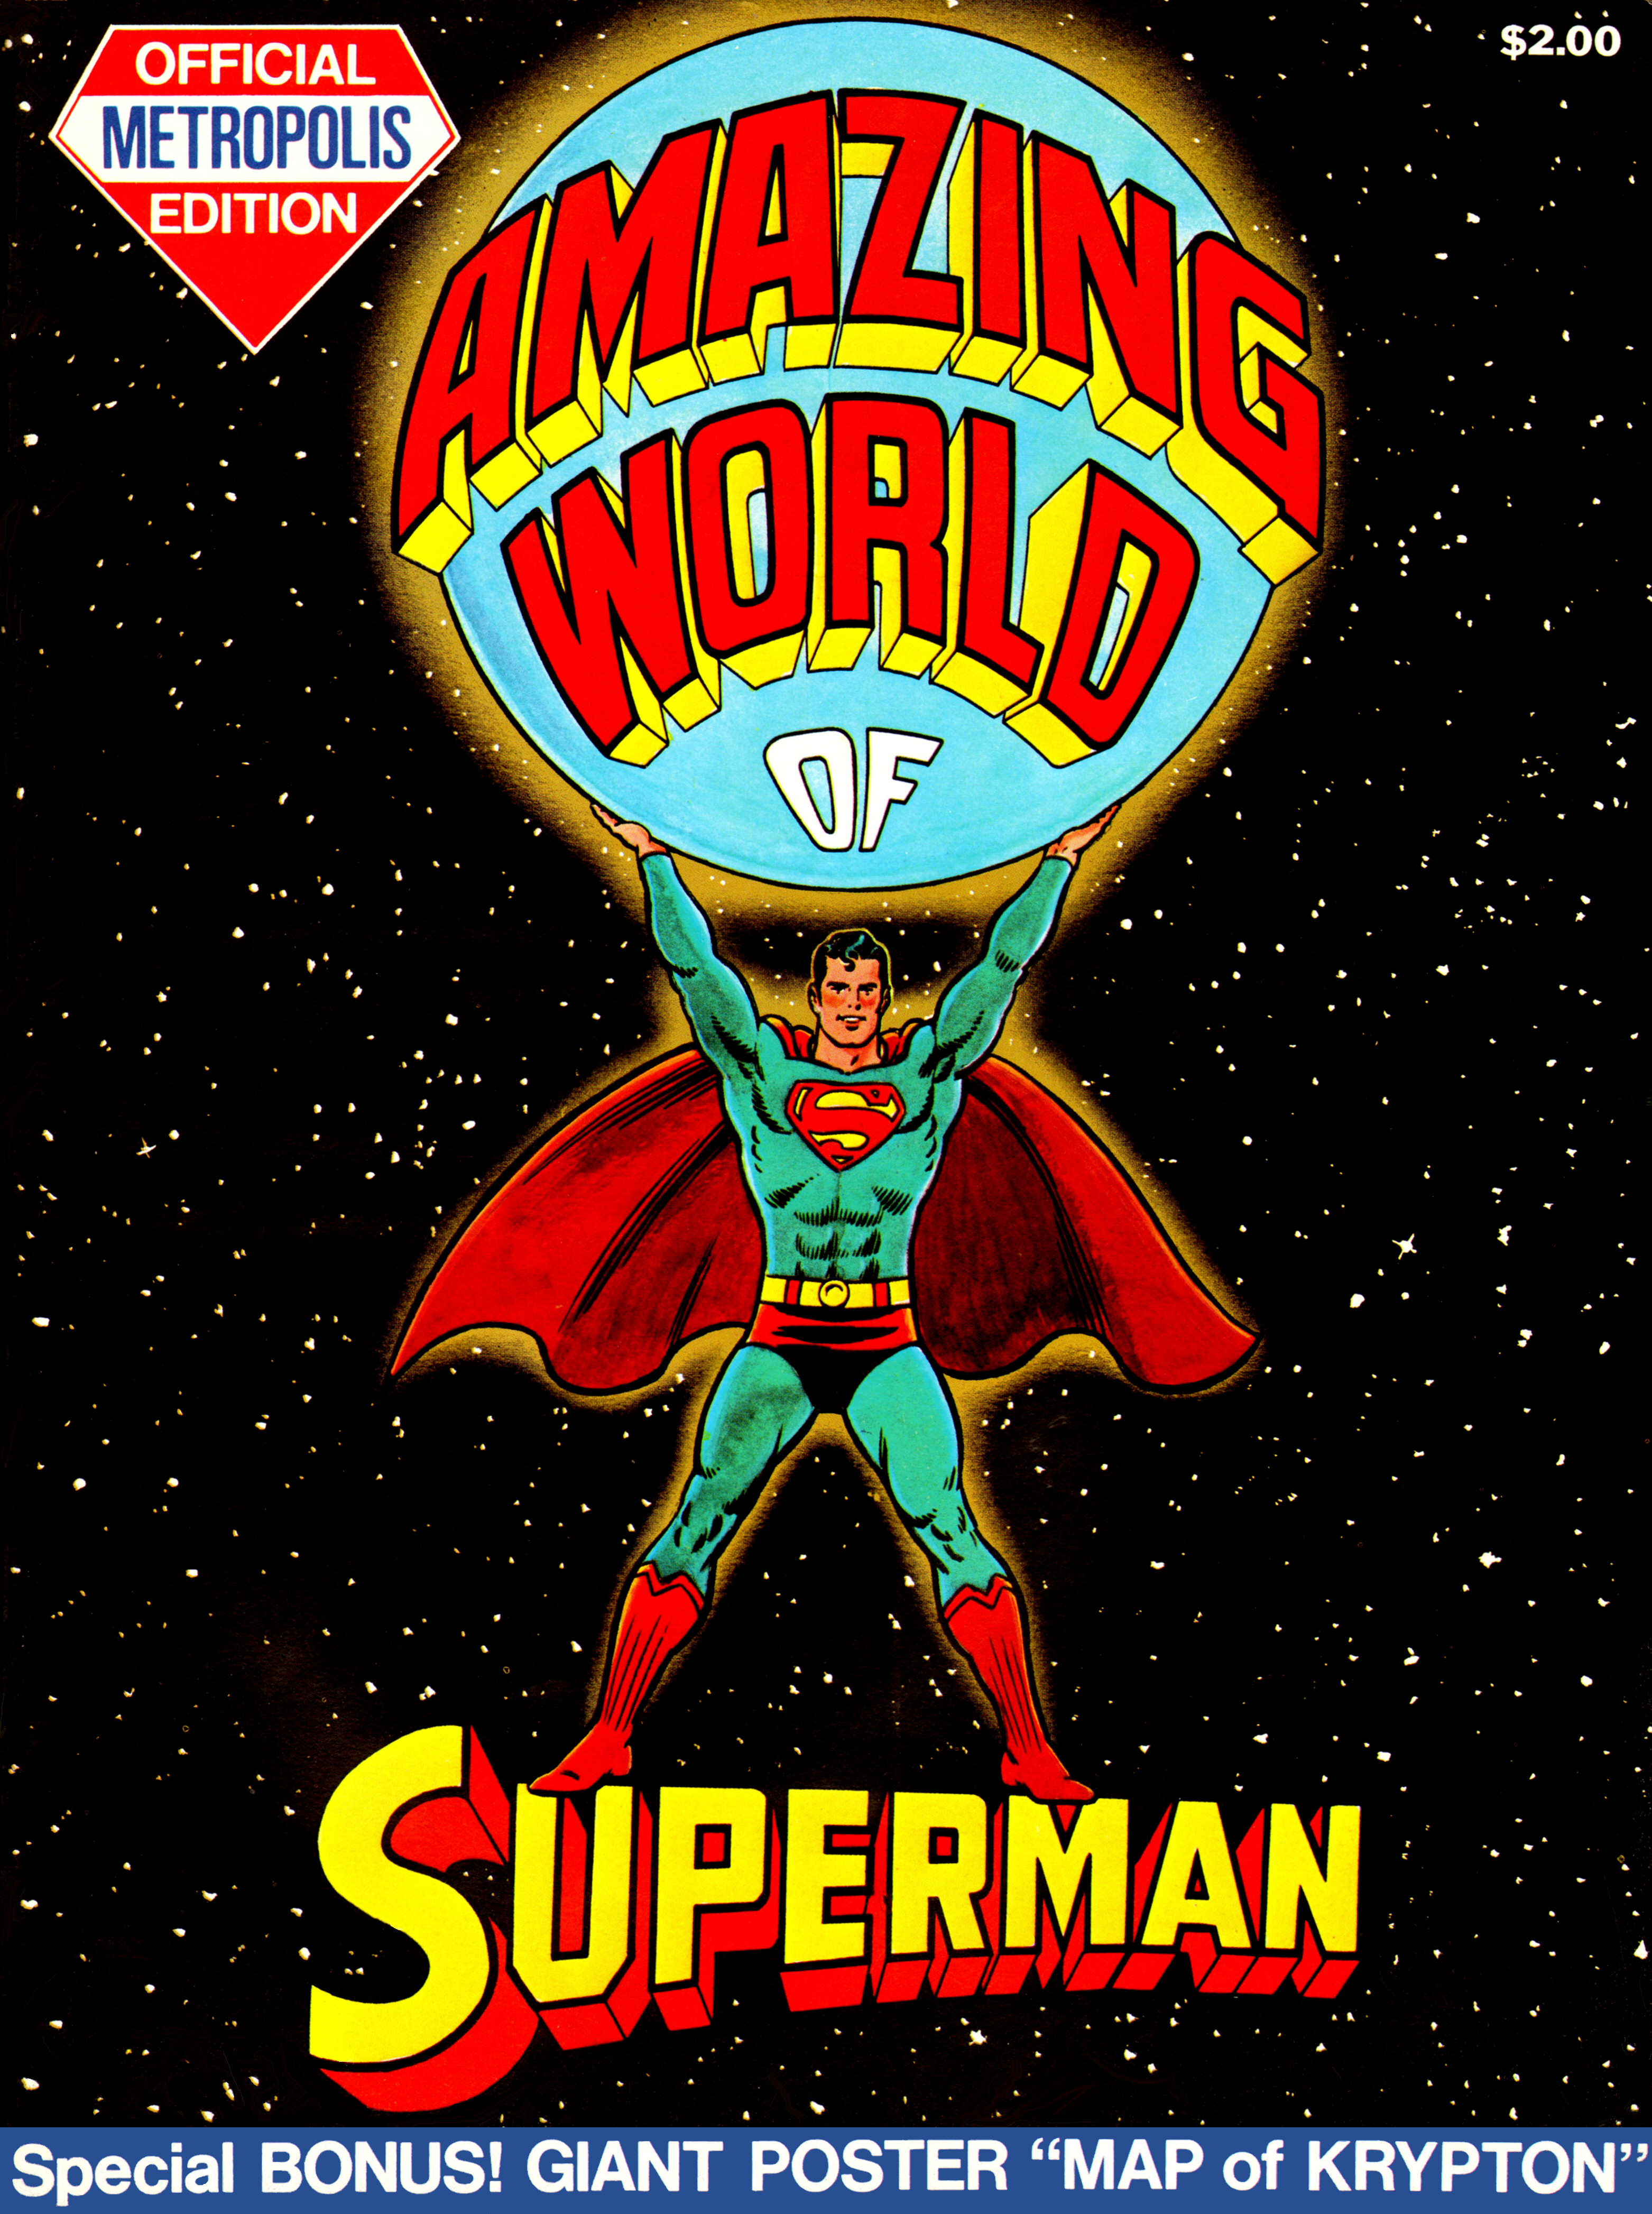 Read online The Amazing World of Superman, Metropolis Edition comic -  Issue # Full - 1